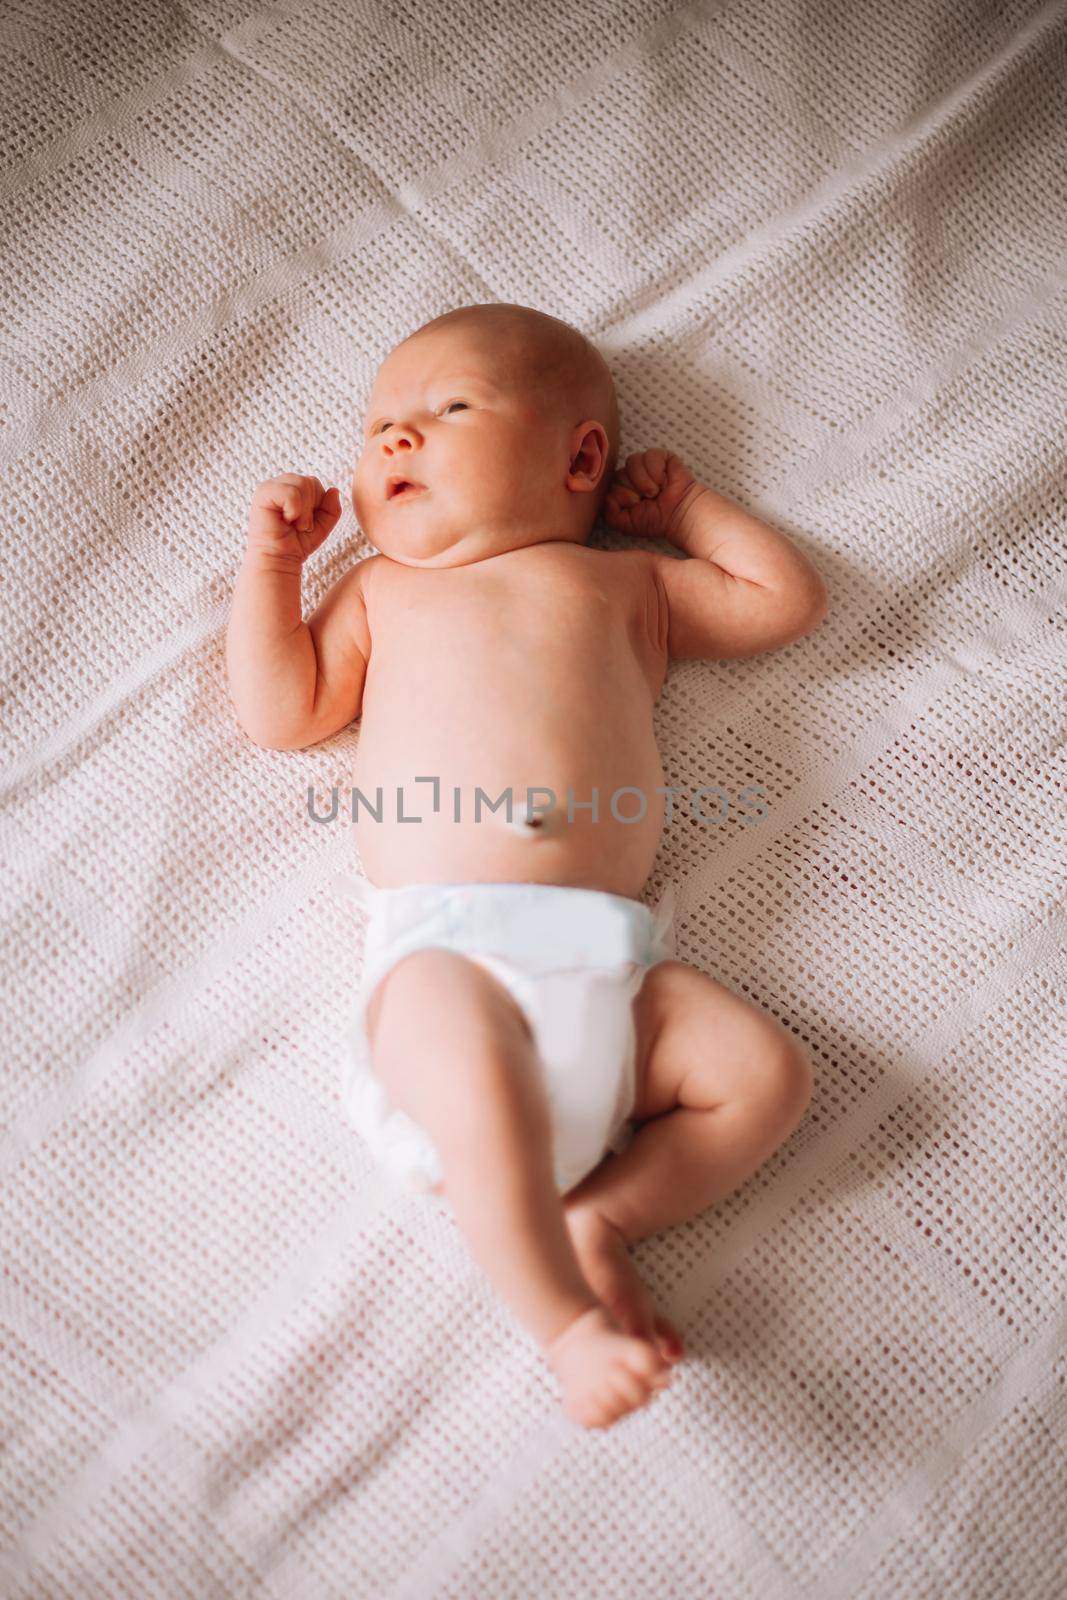 pretty newborn baby boy in a diaper . photo with space for text